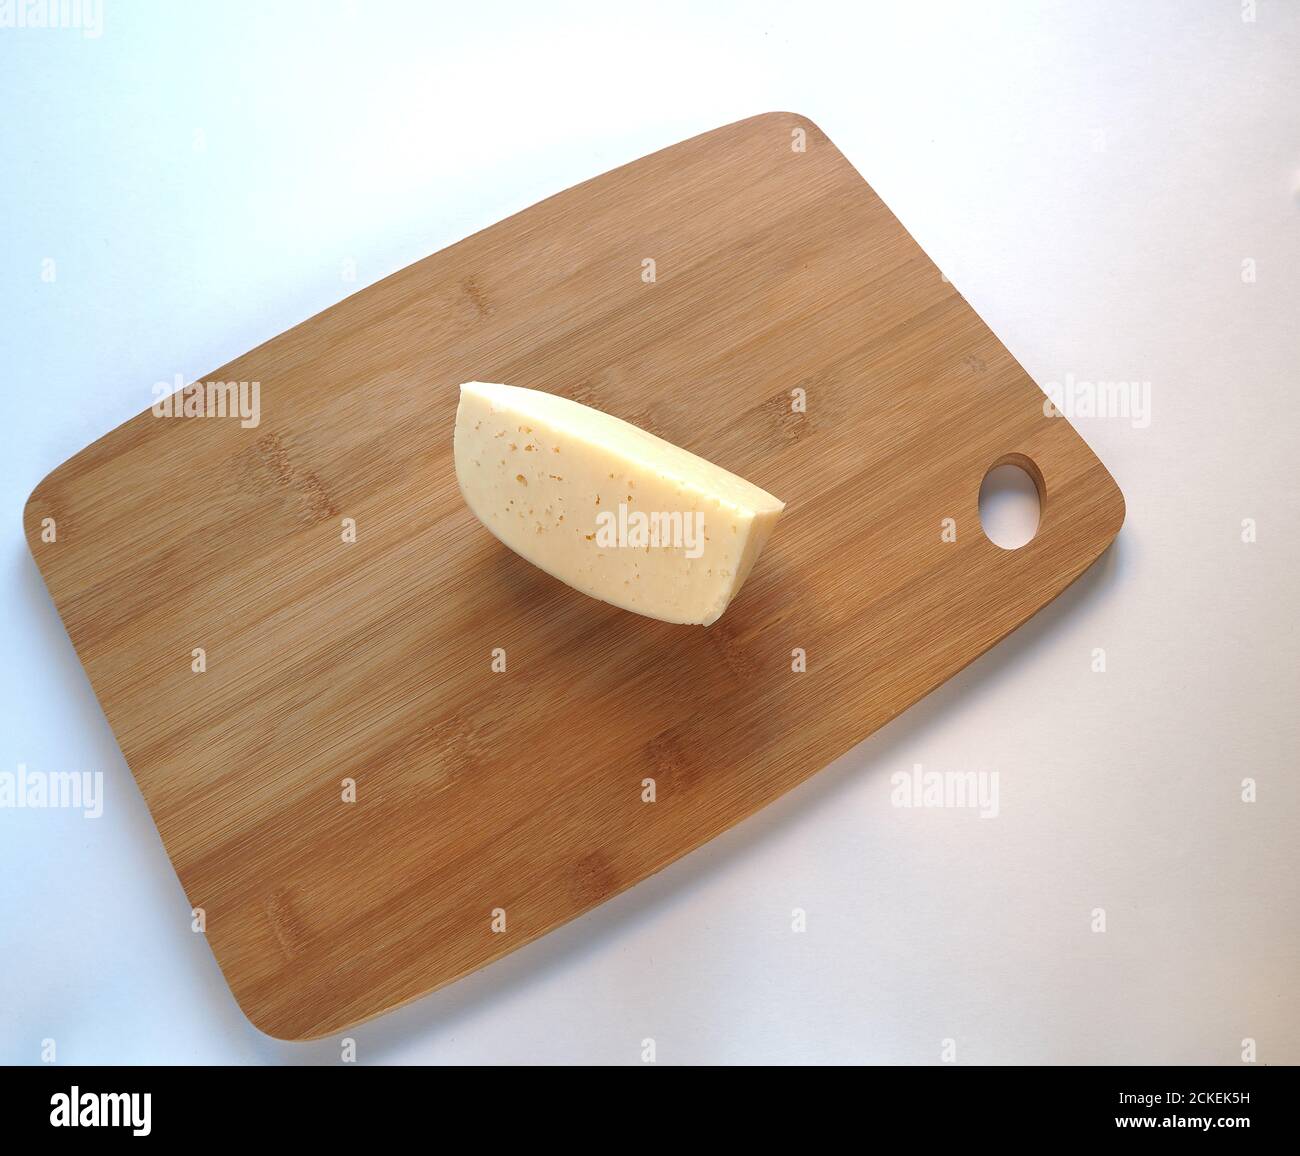 Cheese. Round cheese head on a wooden Board. Piece of cheese. Stock Photo